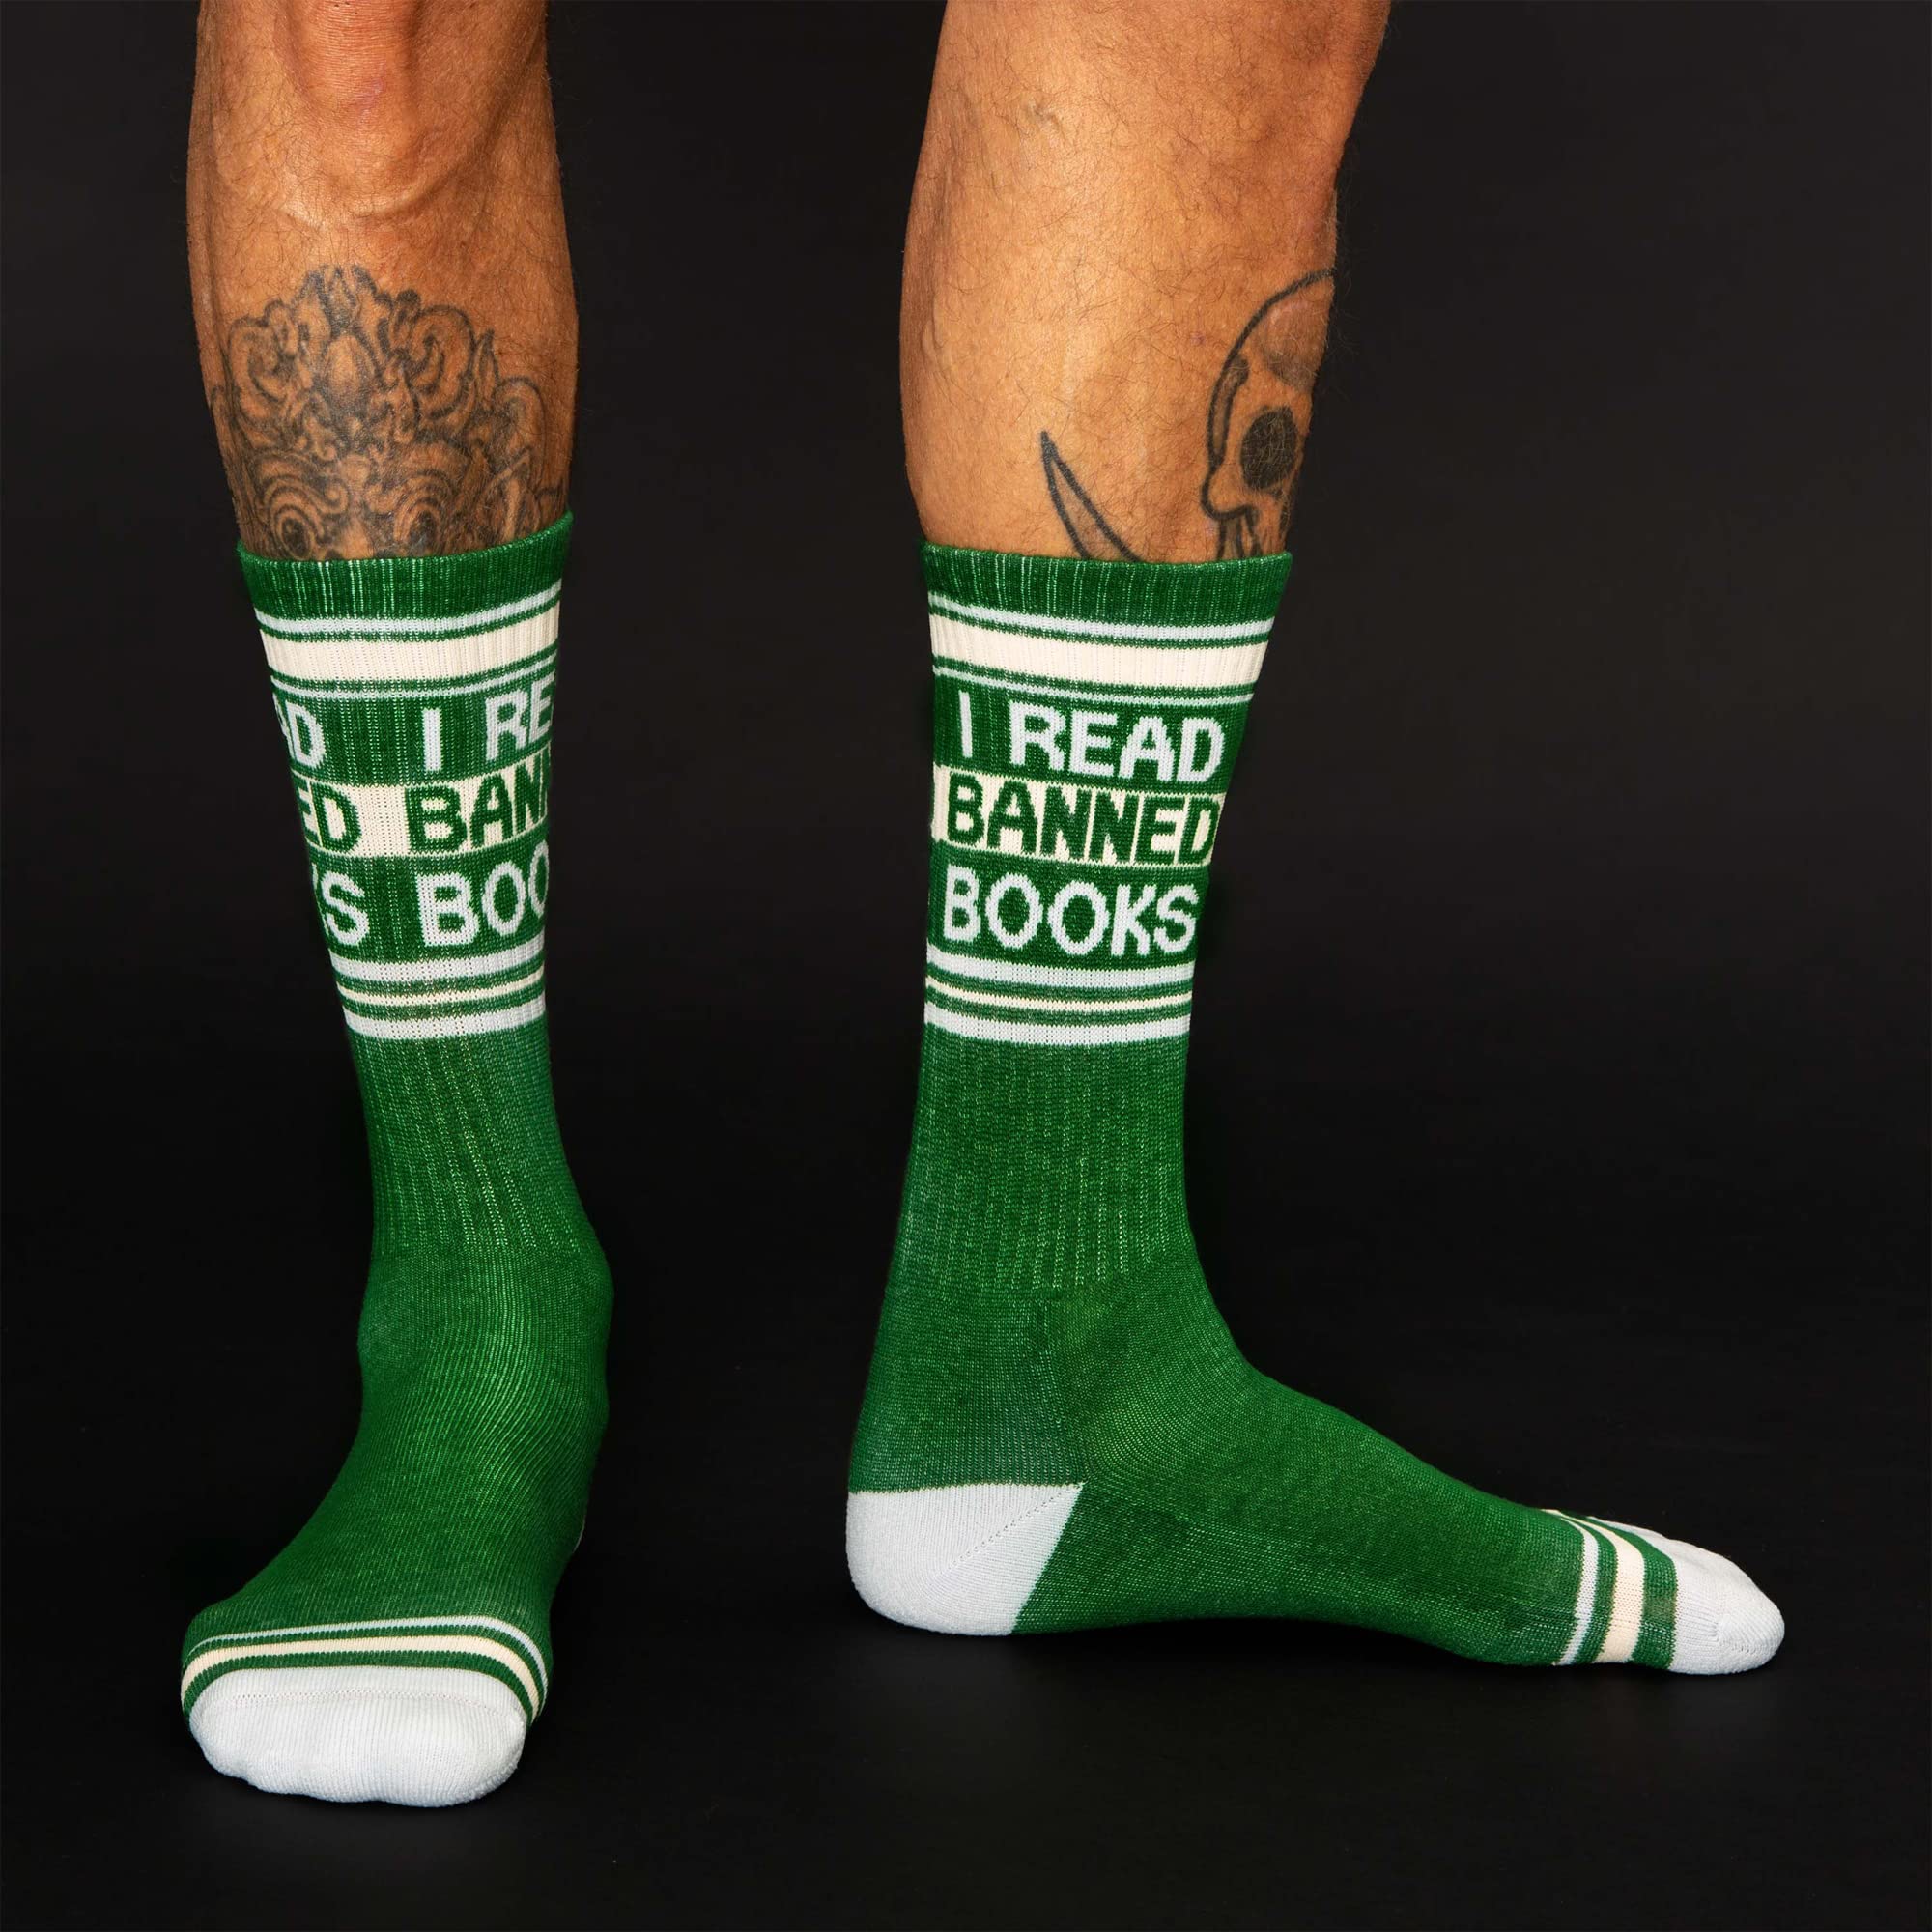 Gumball Poodle I READ BANNED BOOKS, Unisex Gym Socks